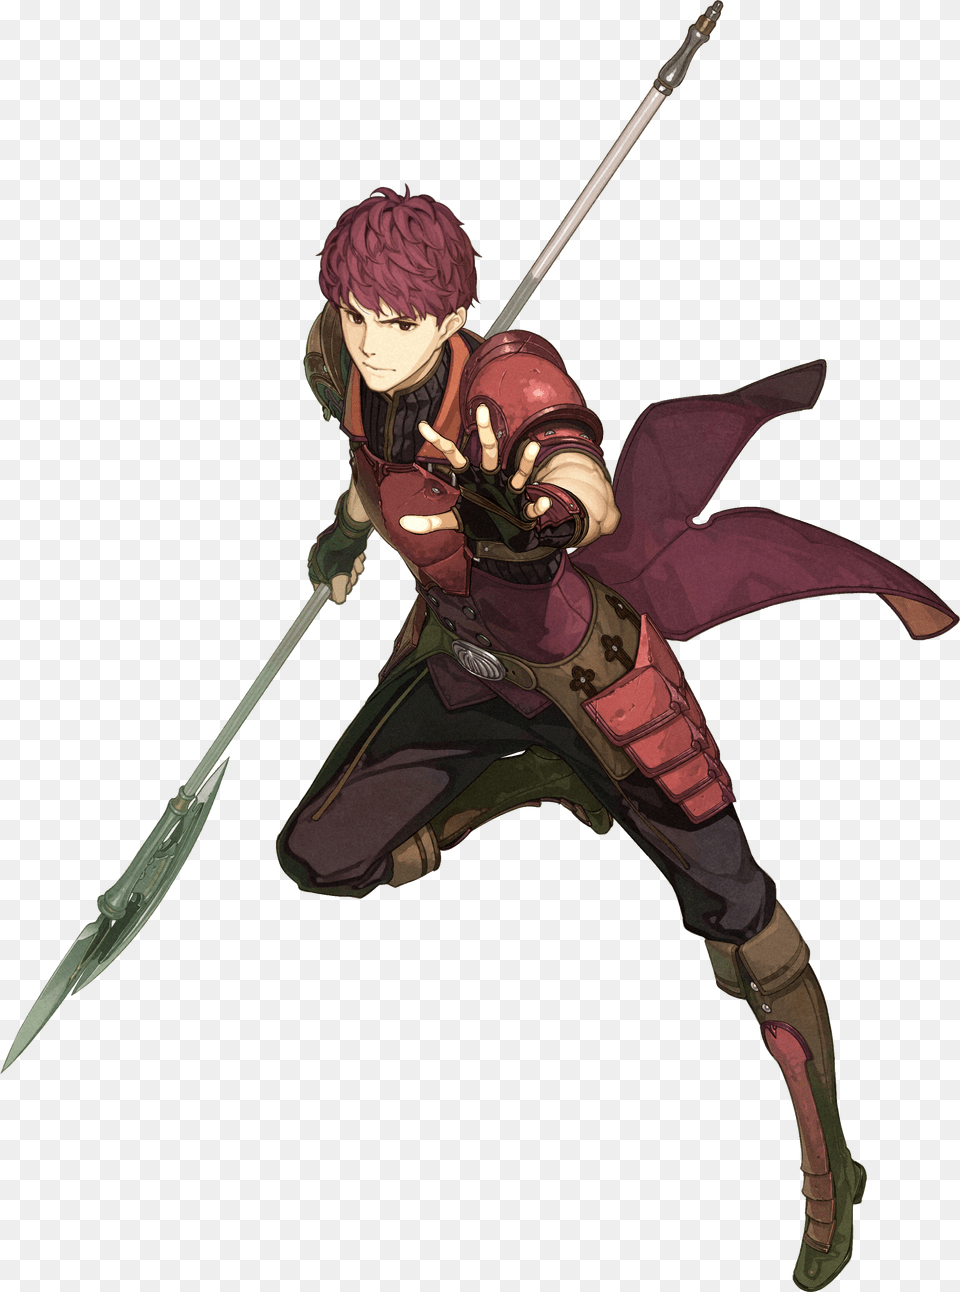 Lukas Fire Emblem Wiki Fandom Powered, Spear, Weapon, Person, Face Png Image